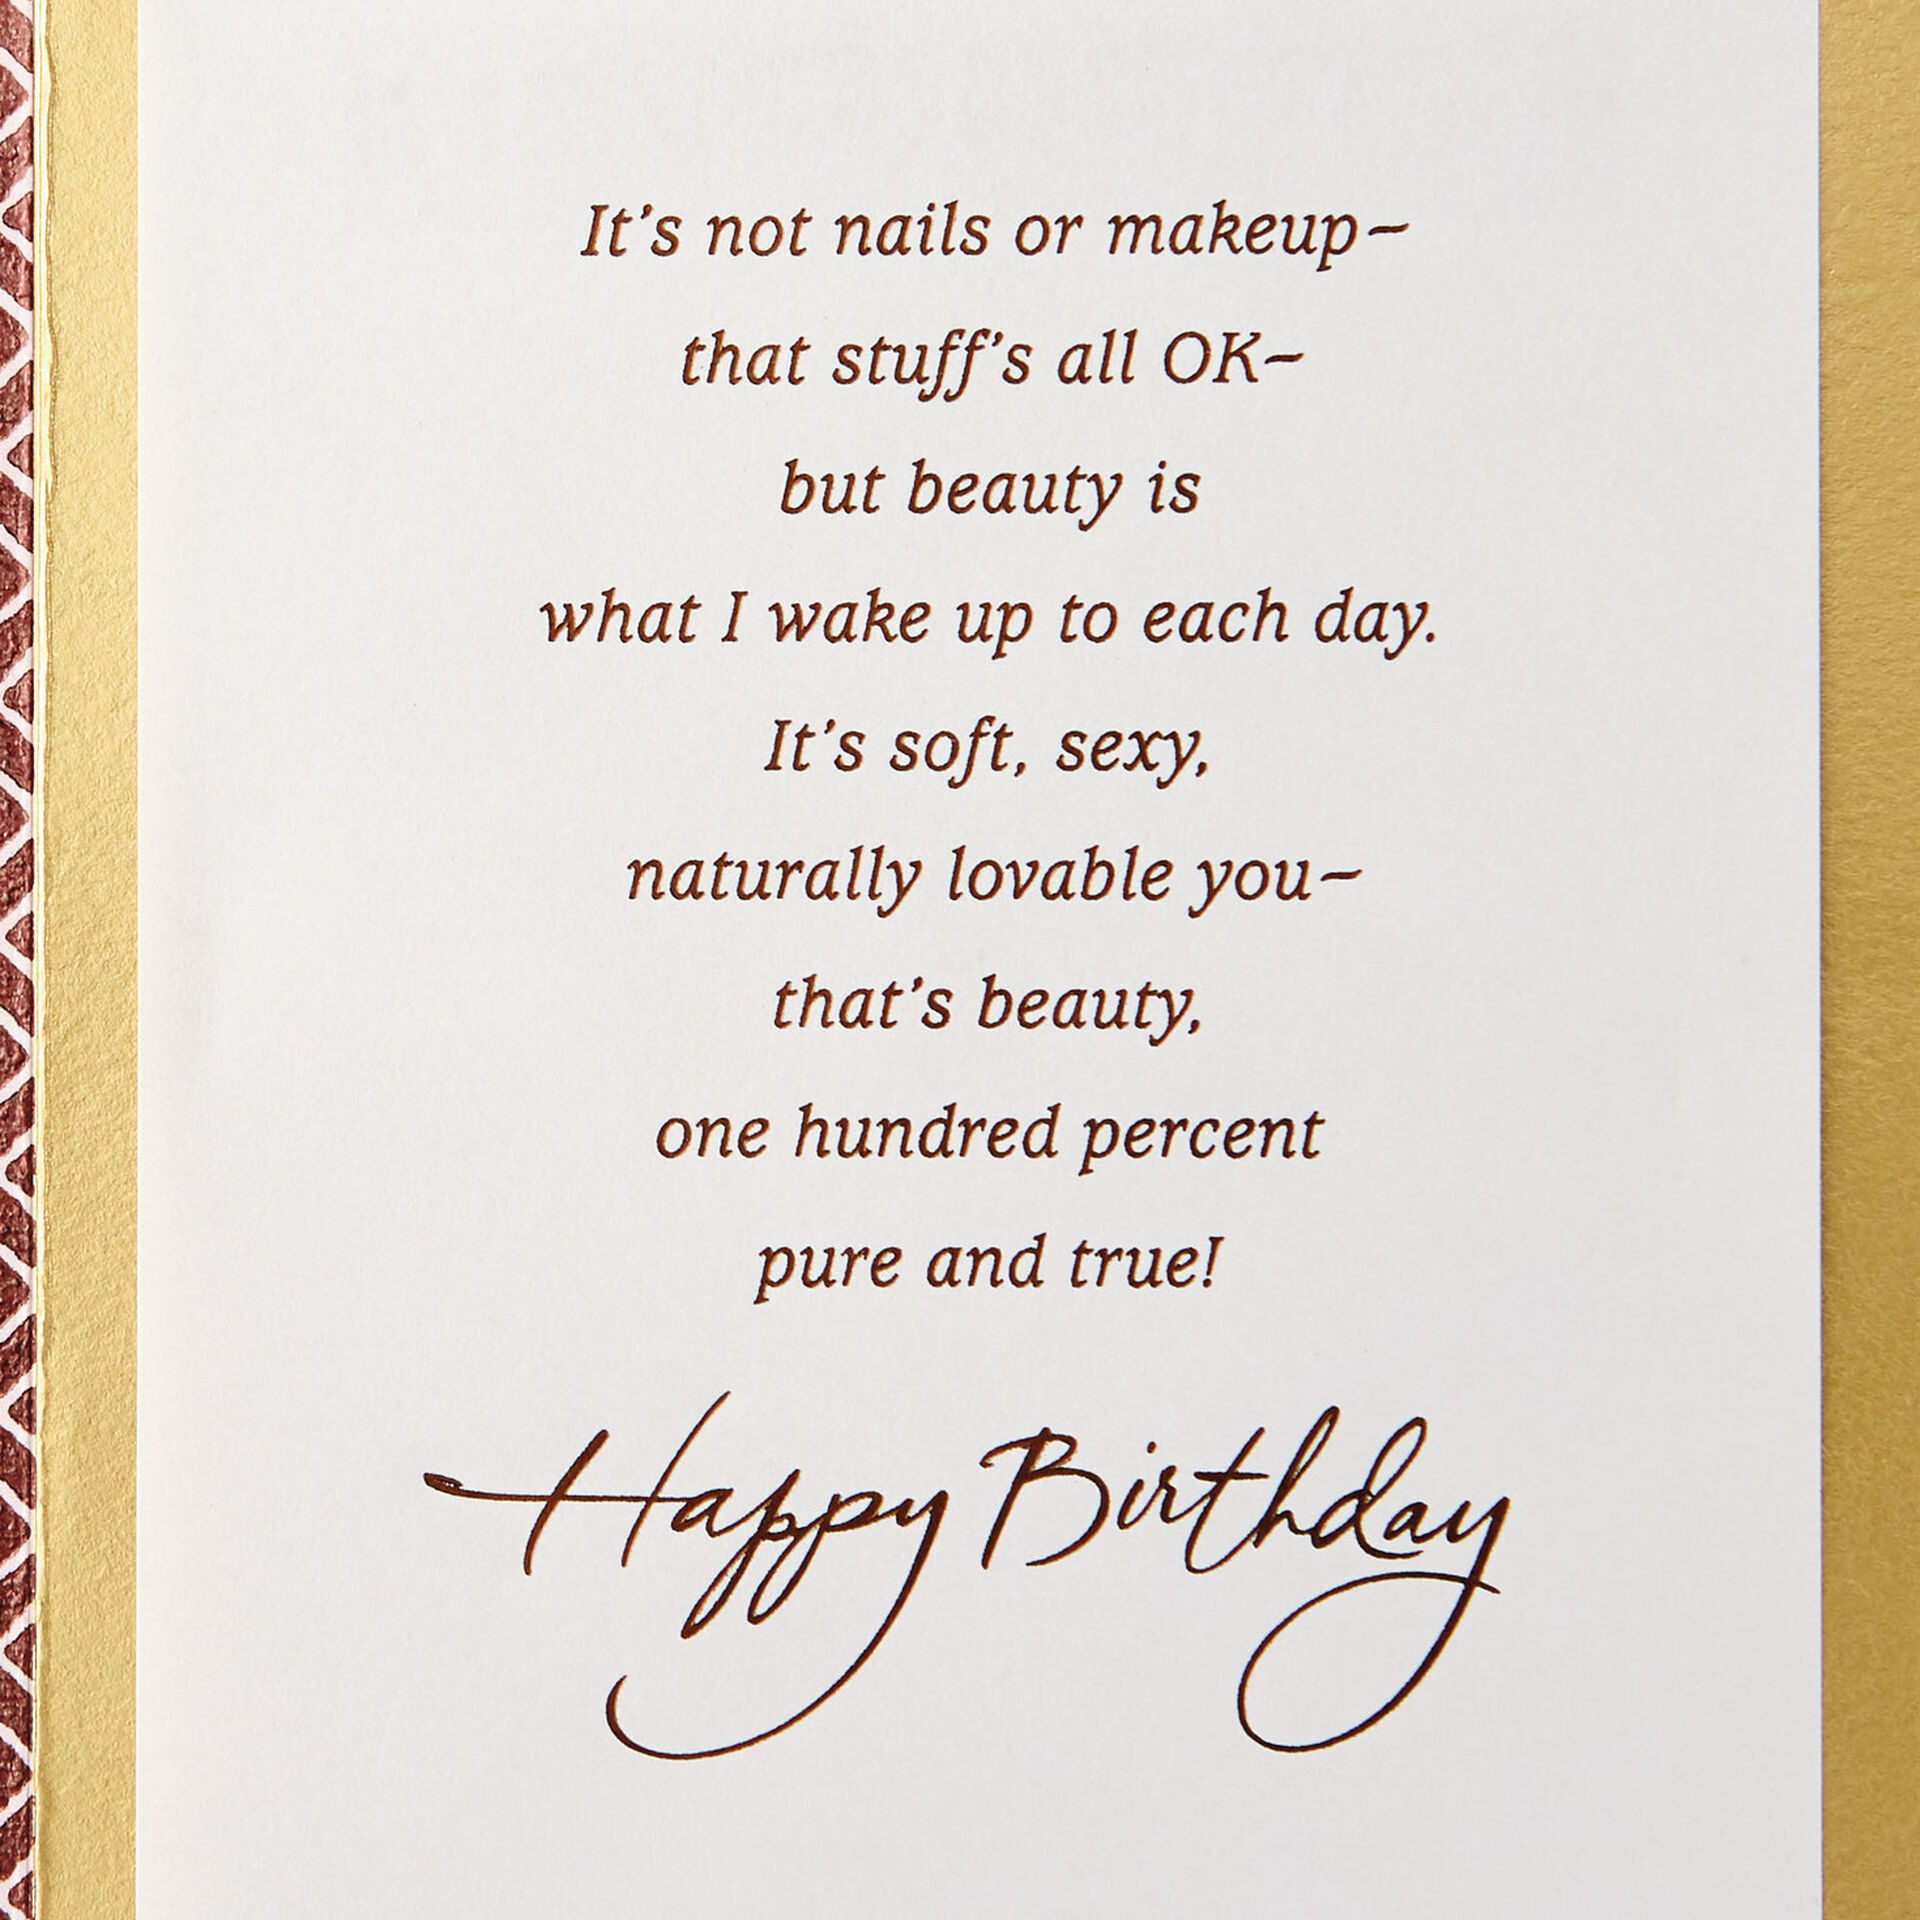 Sketched-Woman-True-Beauty-Birthday-Card-for-Wife_499MHB1822_02